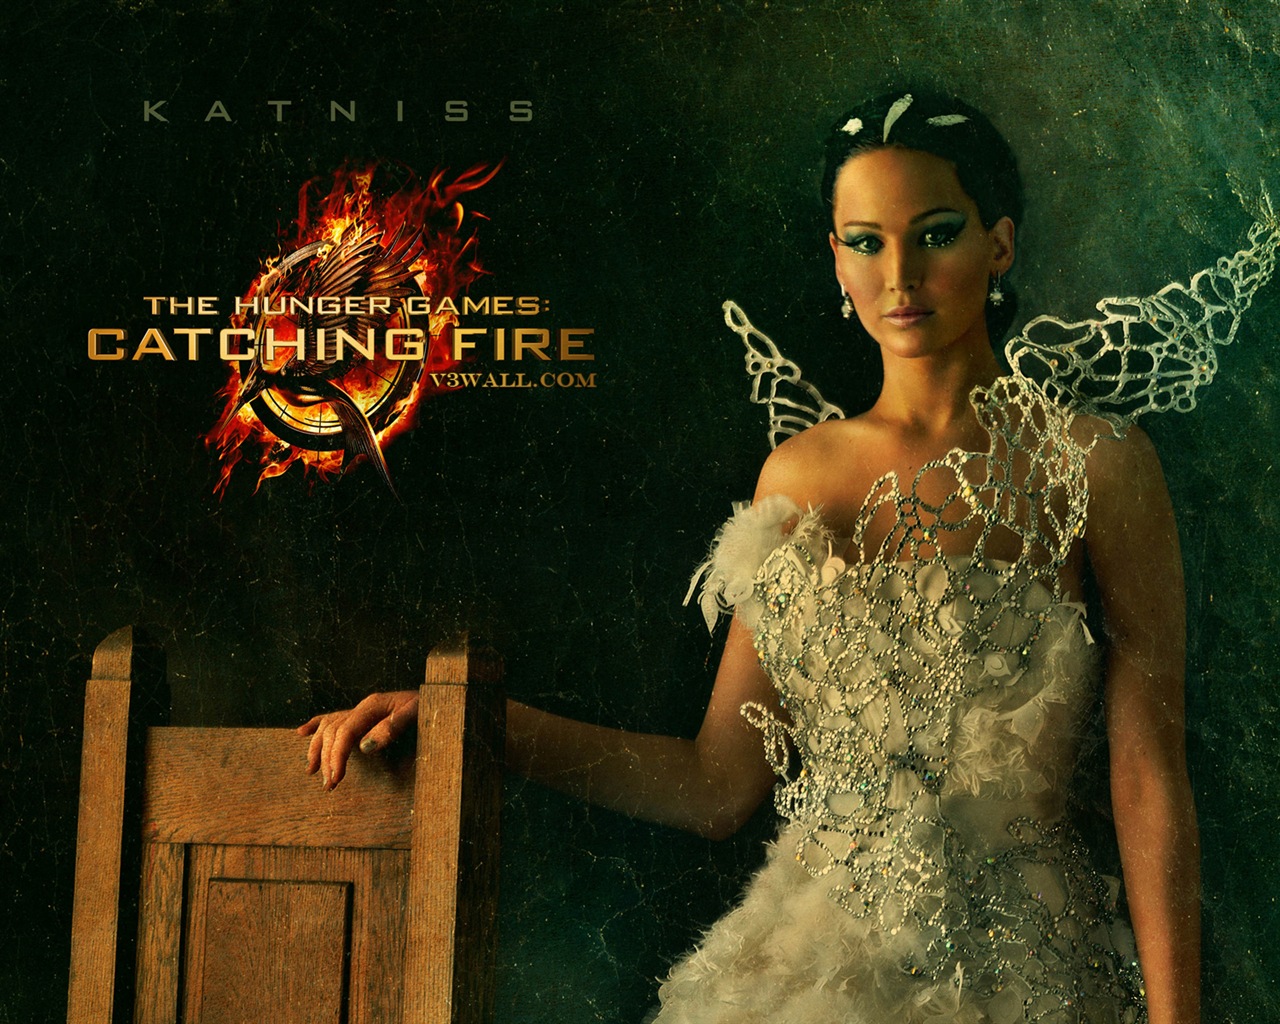 The Hunger Games: Catching Fire wallpapers HD #13 - 1280x1024